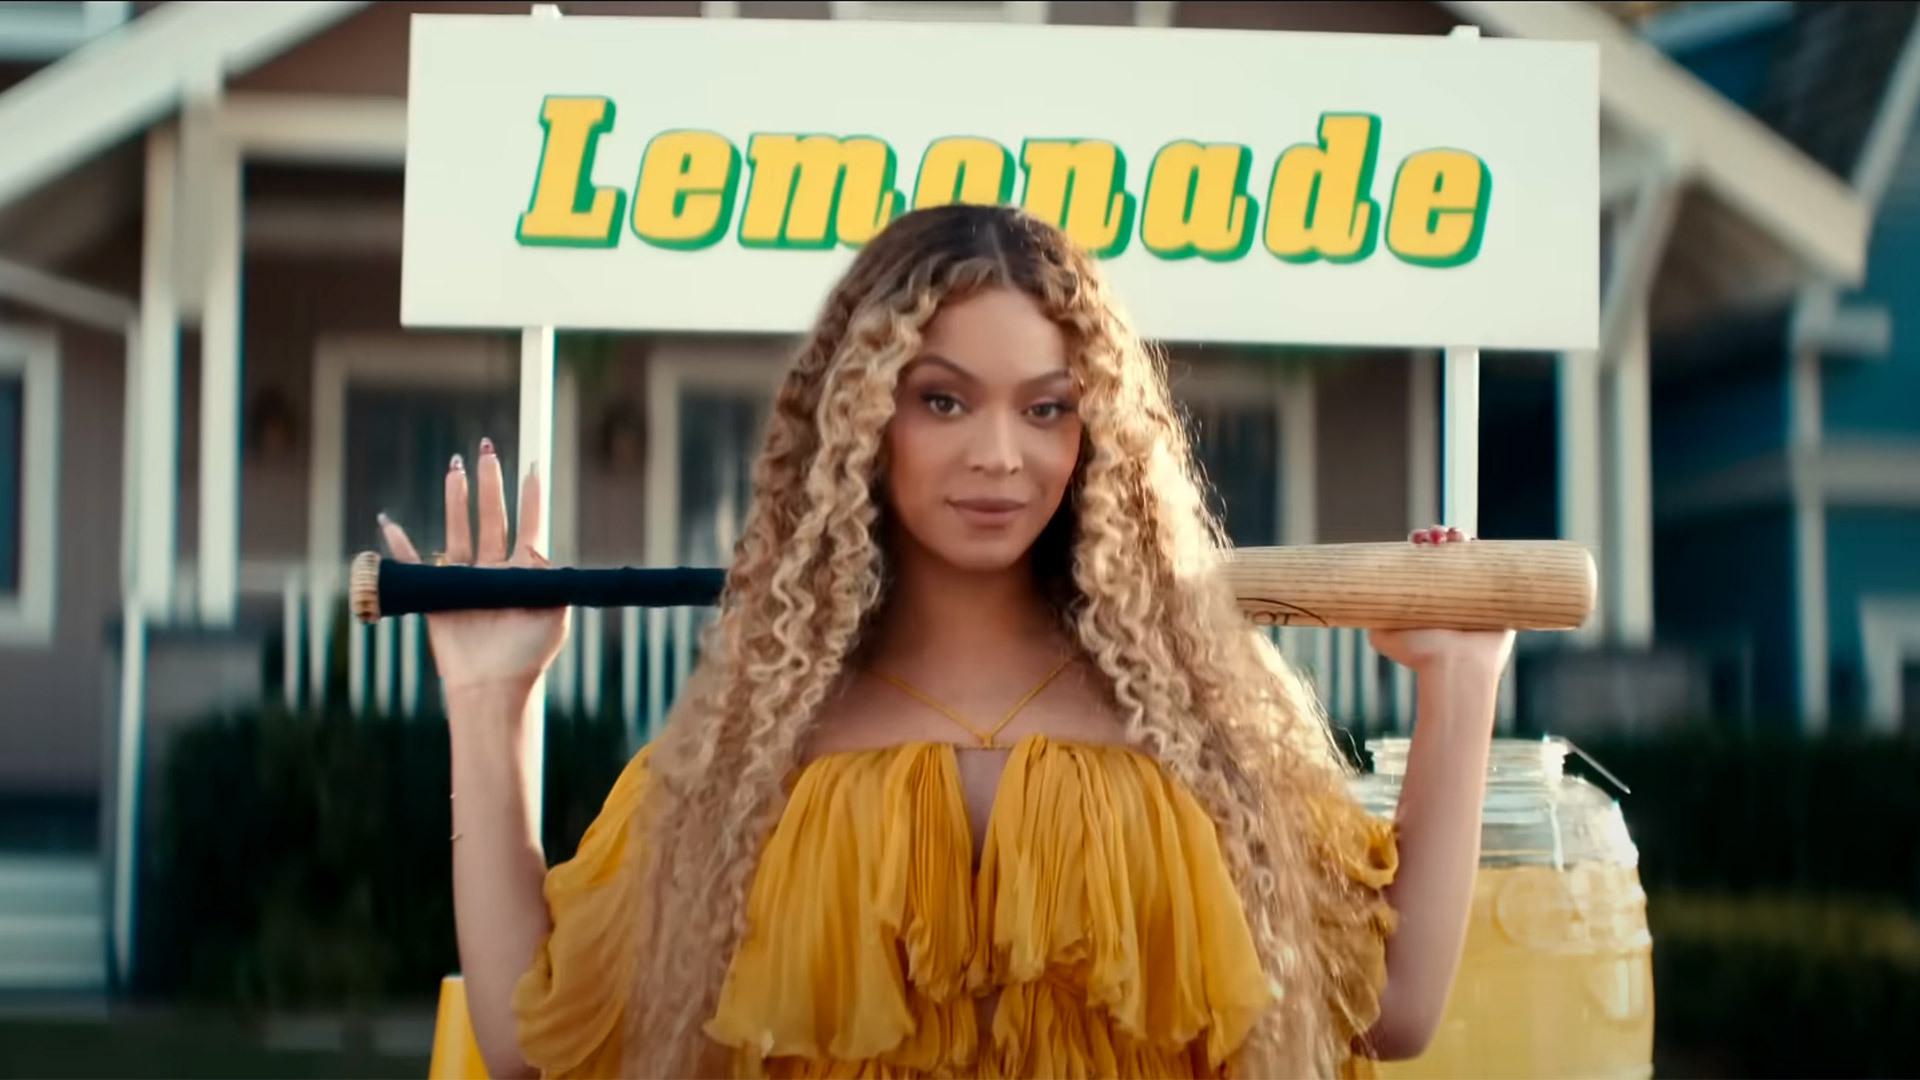 Beyonce carrying a bat behind her head in front of a sign that says Lemonade